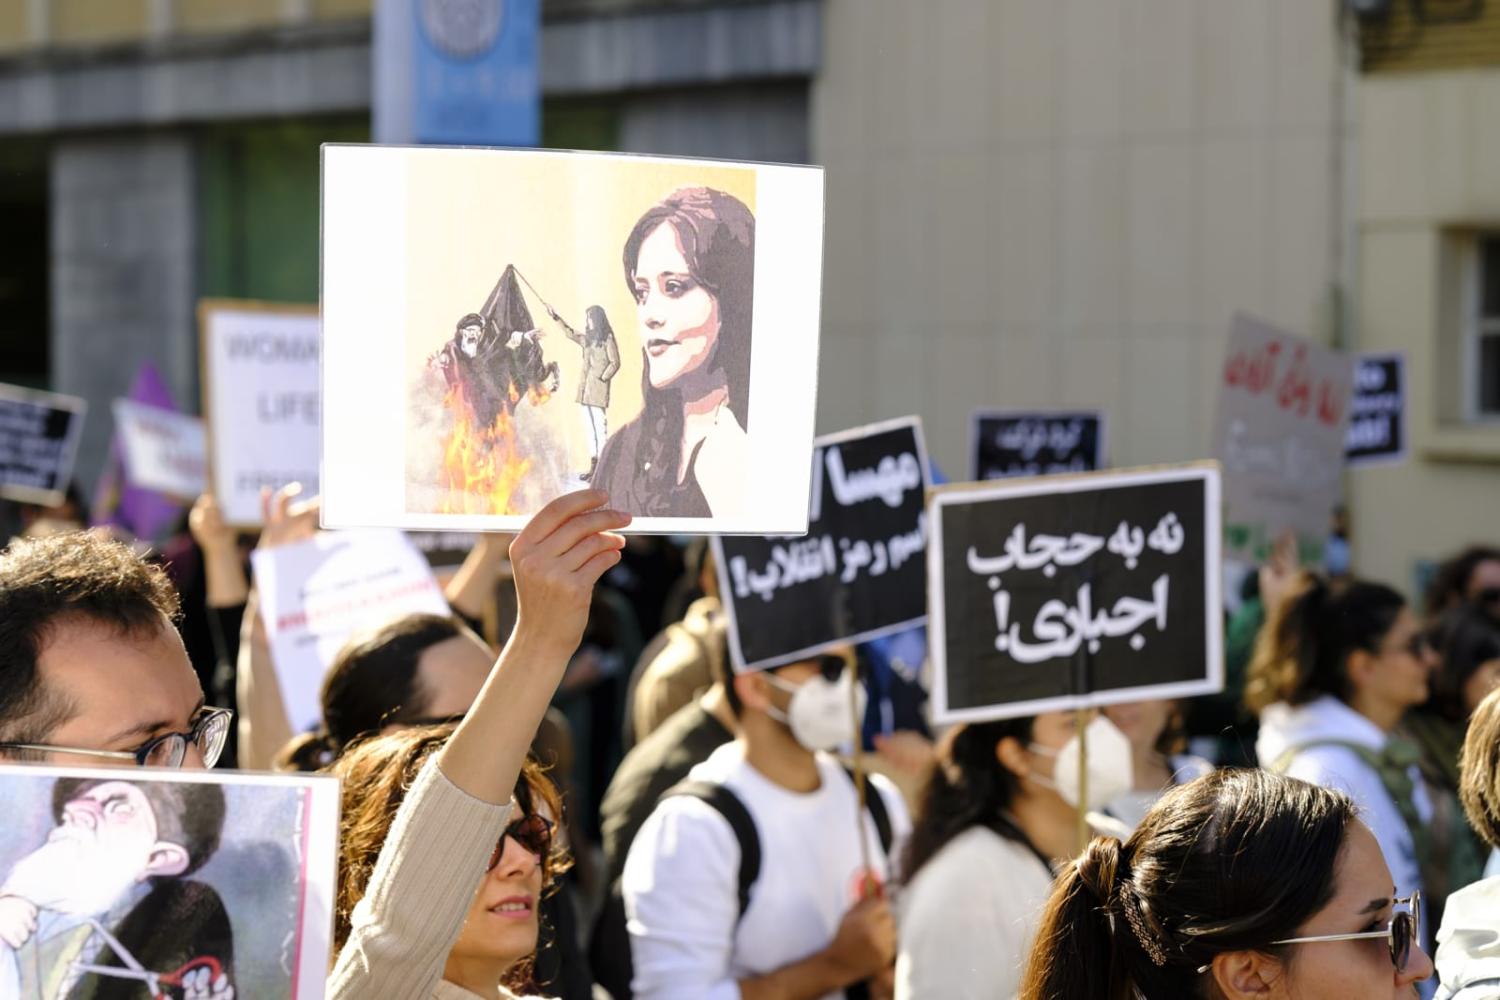 Demonstrations in Belgium, among protests in cities across the world in solidarity with Iranians following the death of Mahsa Amini (Thierry Monasse/Getty Images)